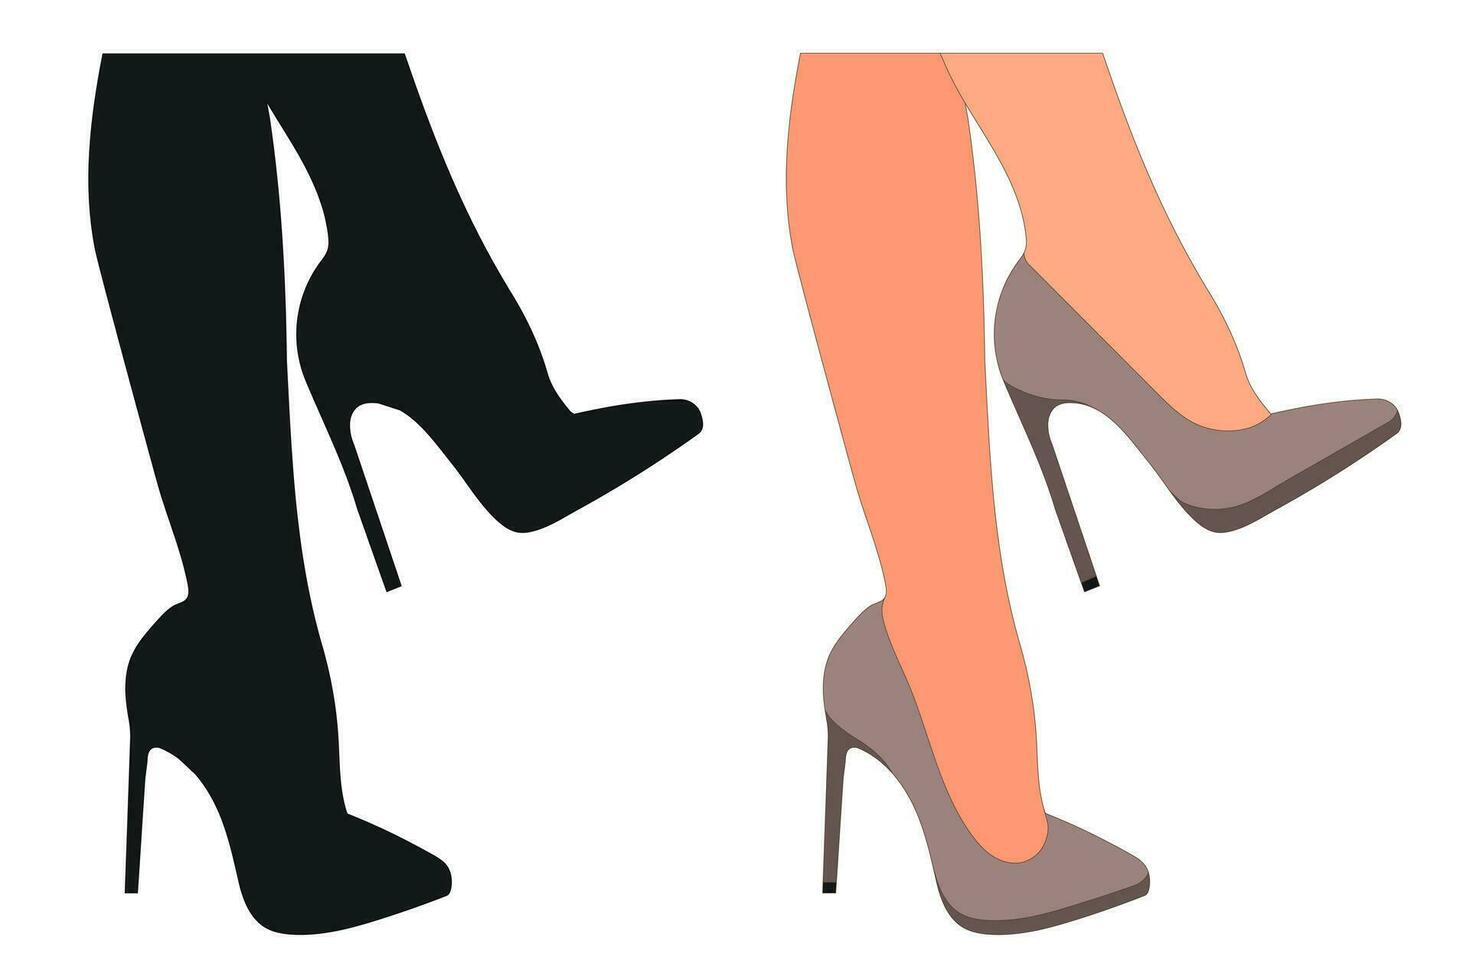 Sketchy image of the silhouette of womens shoes. Shoes stilettos, high heels vector